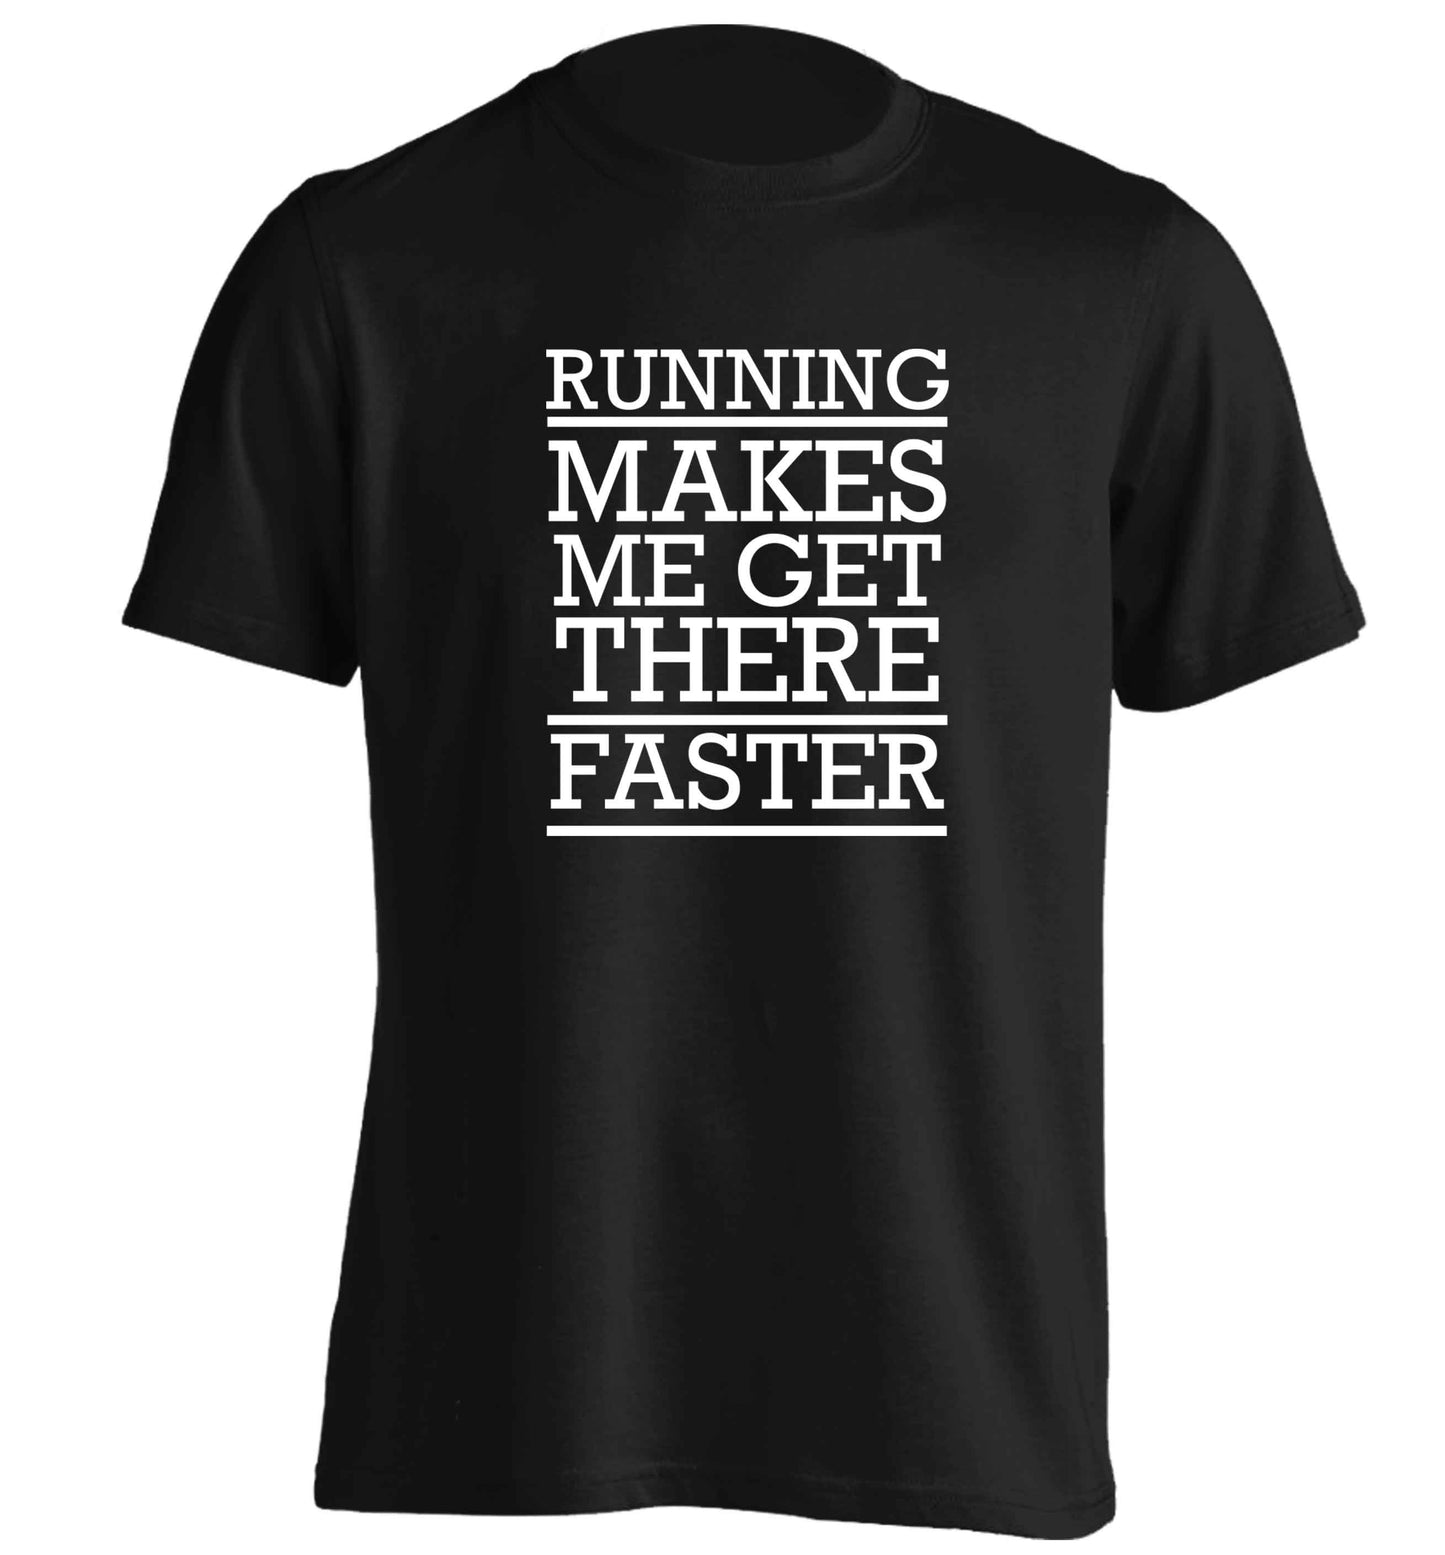 Running makes me get there faster adults unisex black Tshirt 2XL